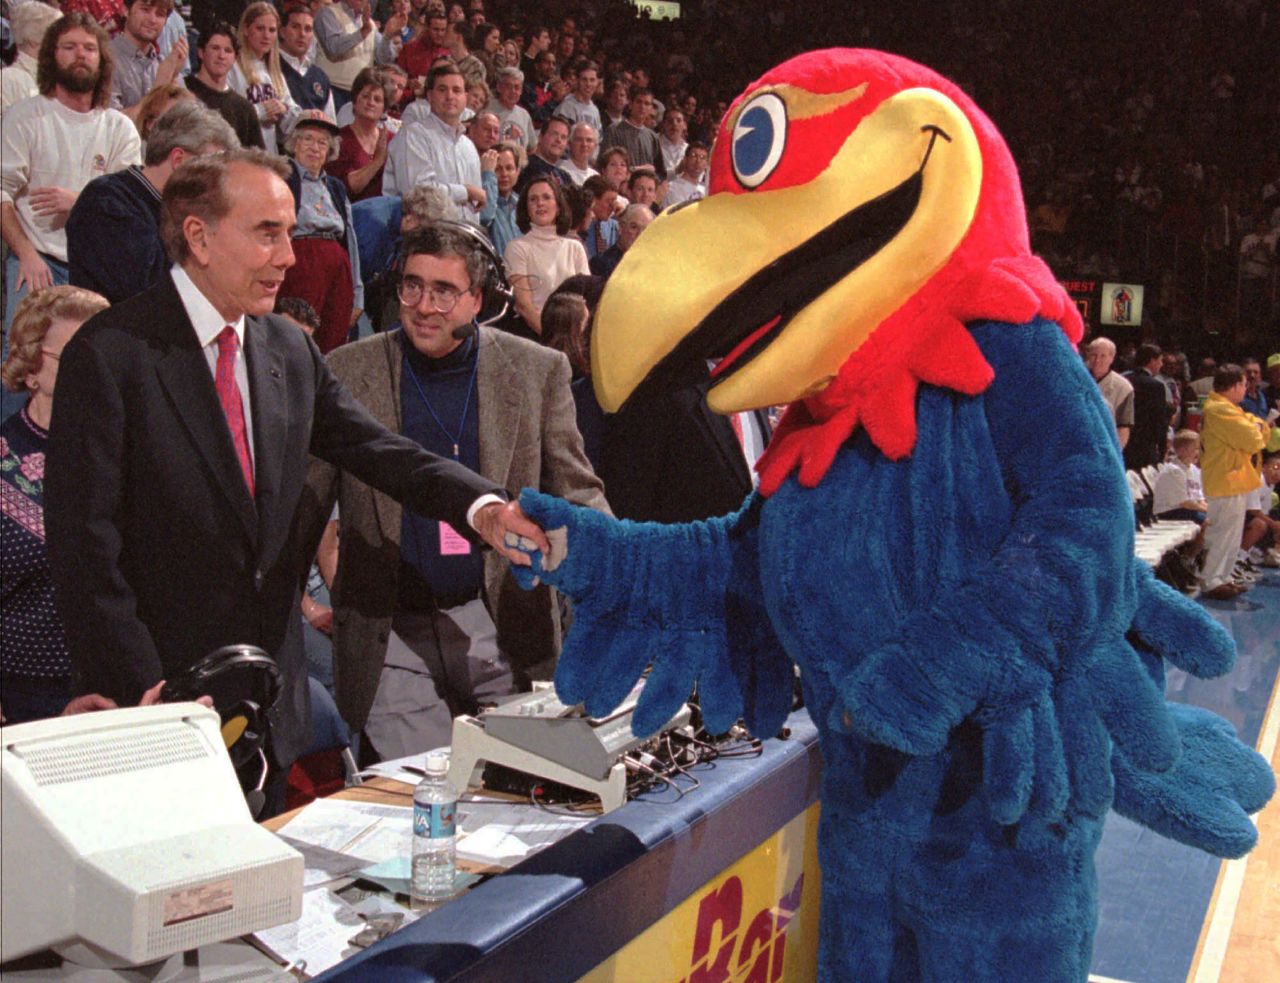 Dole shakes hands with the University of Kansas' mascot during a basketball game in 1998.